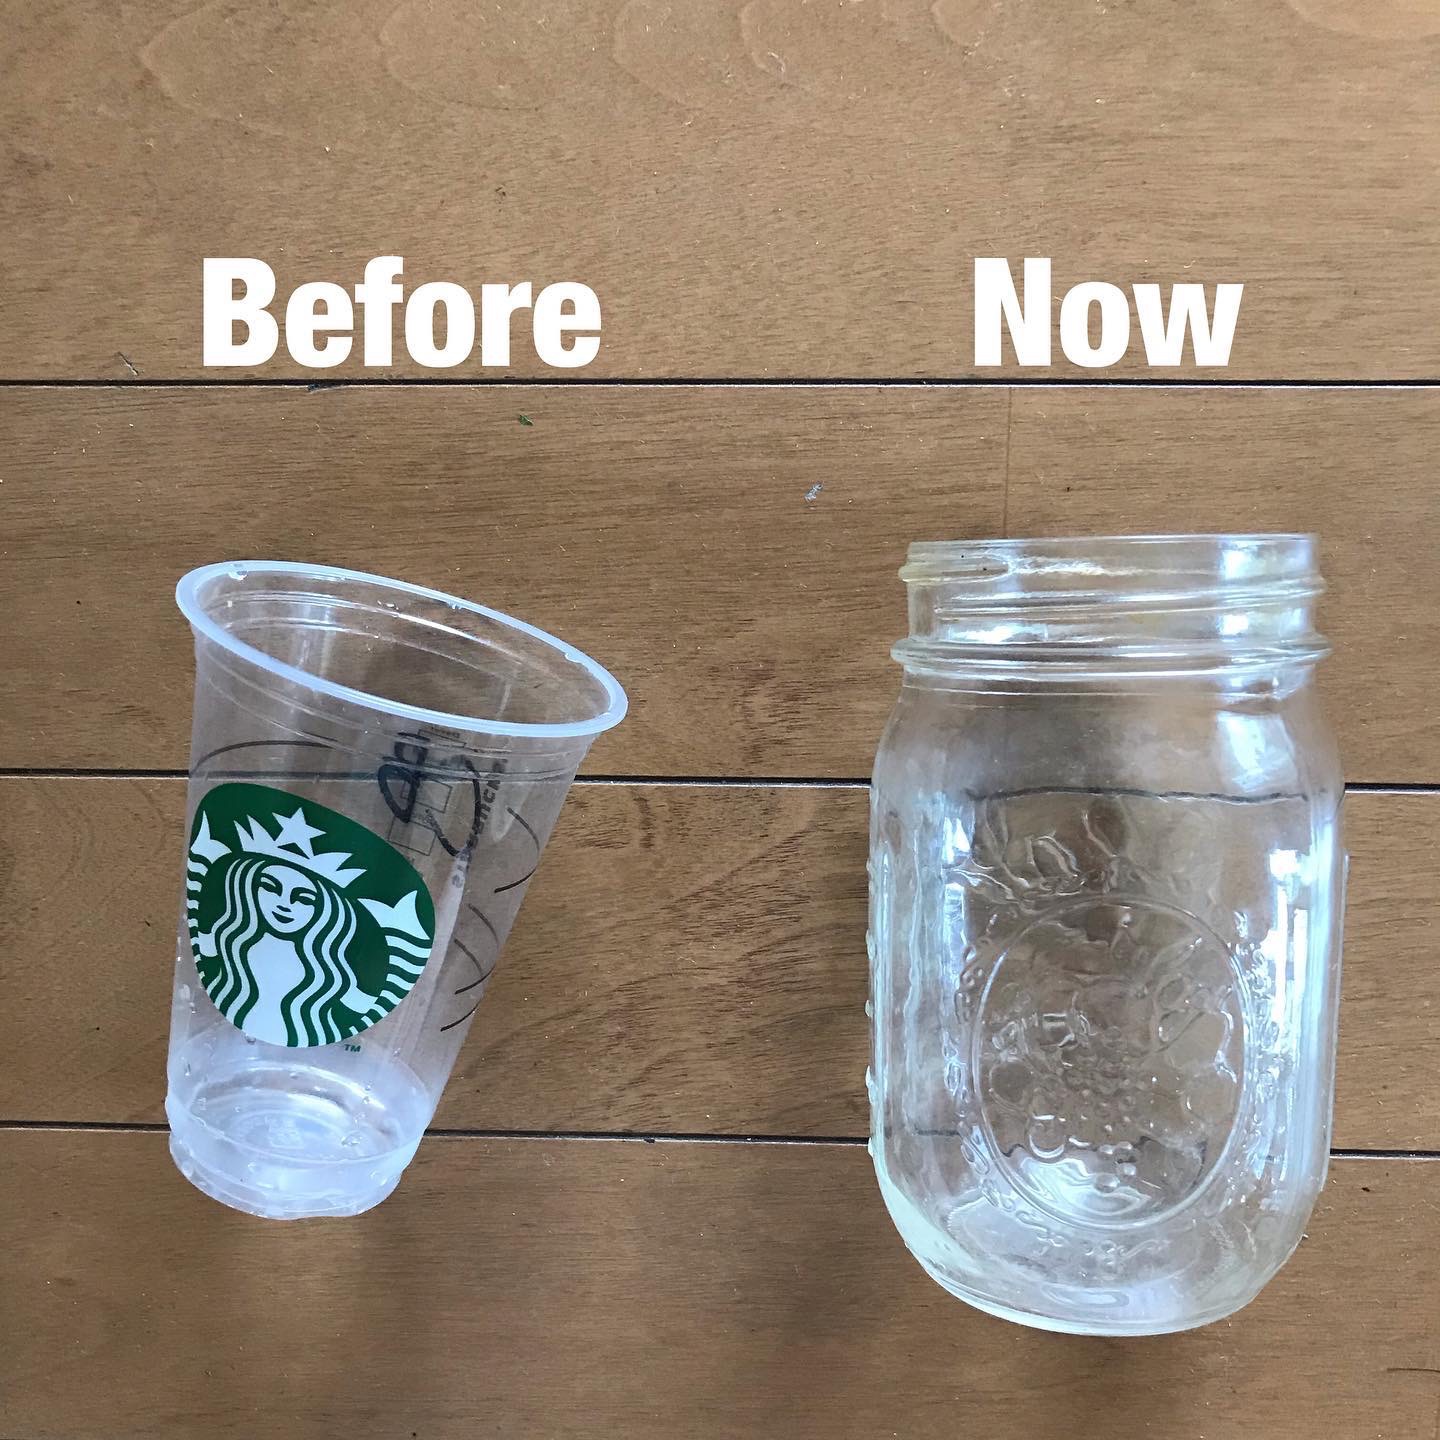 Bring your reusable mug and grab your favorite coffee ☕️I used to use disposable cups. Drinking out of reusable cups makes a huge difference in my opinion. It’s also easy to rinse clean, will continue using this for a while, plus it’s eco friendly!